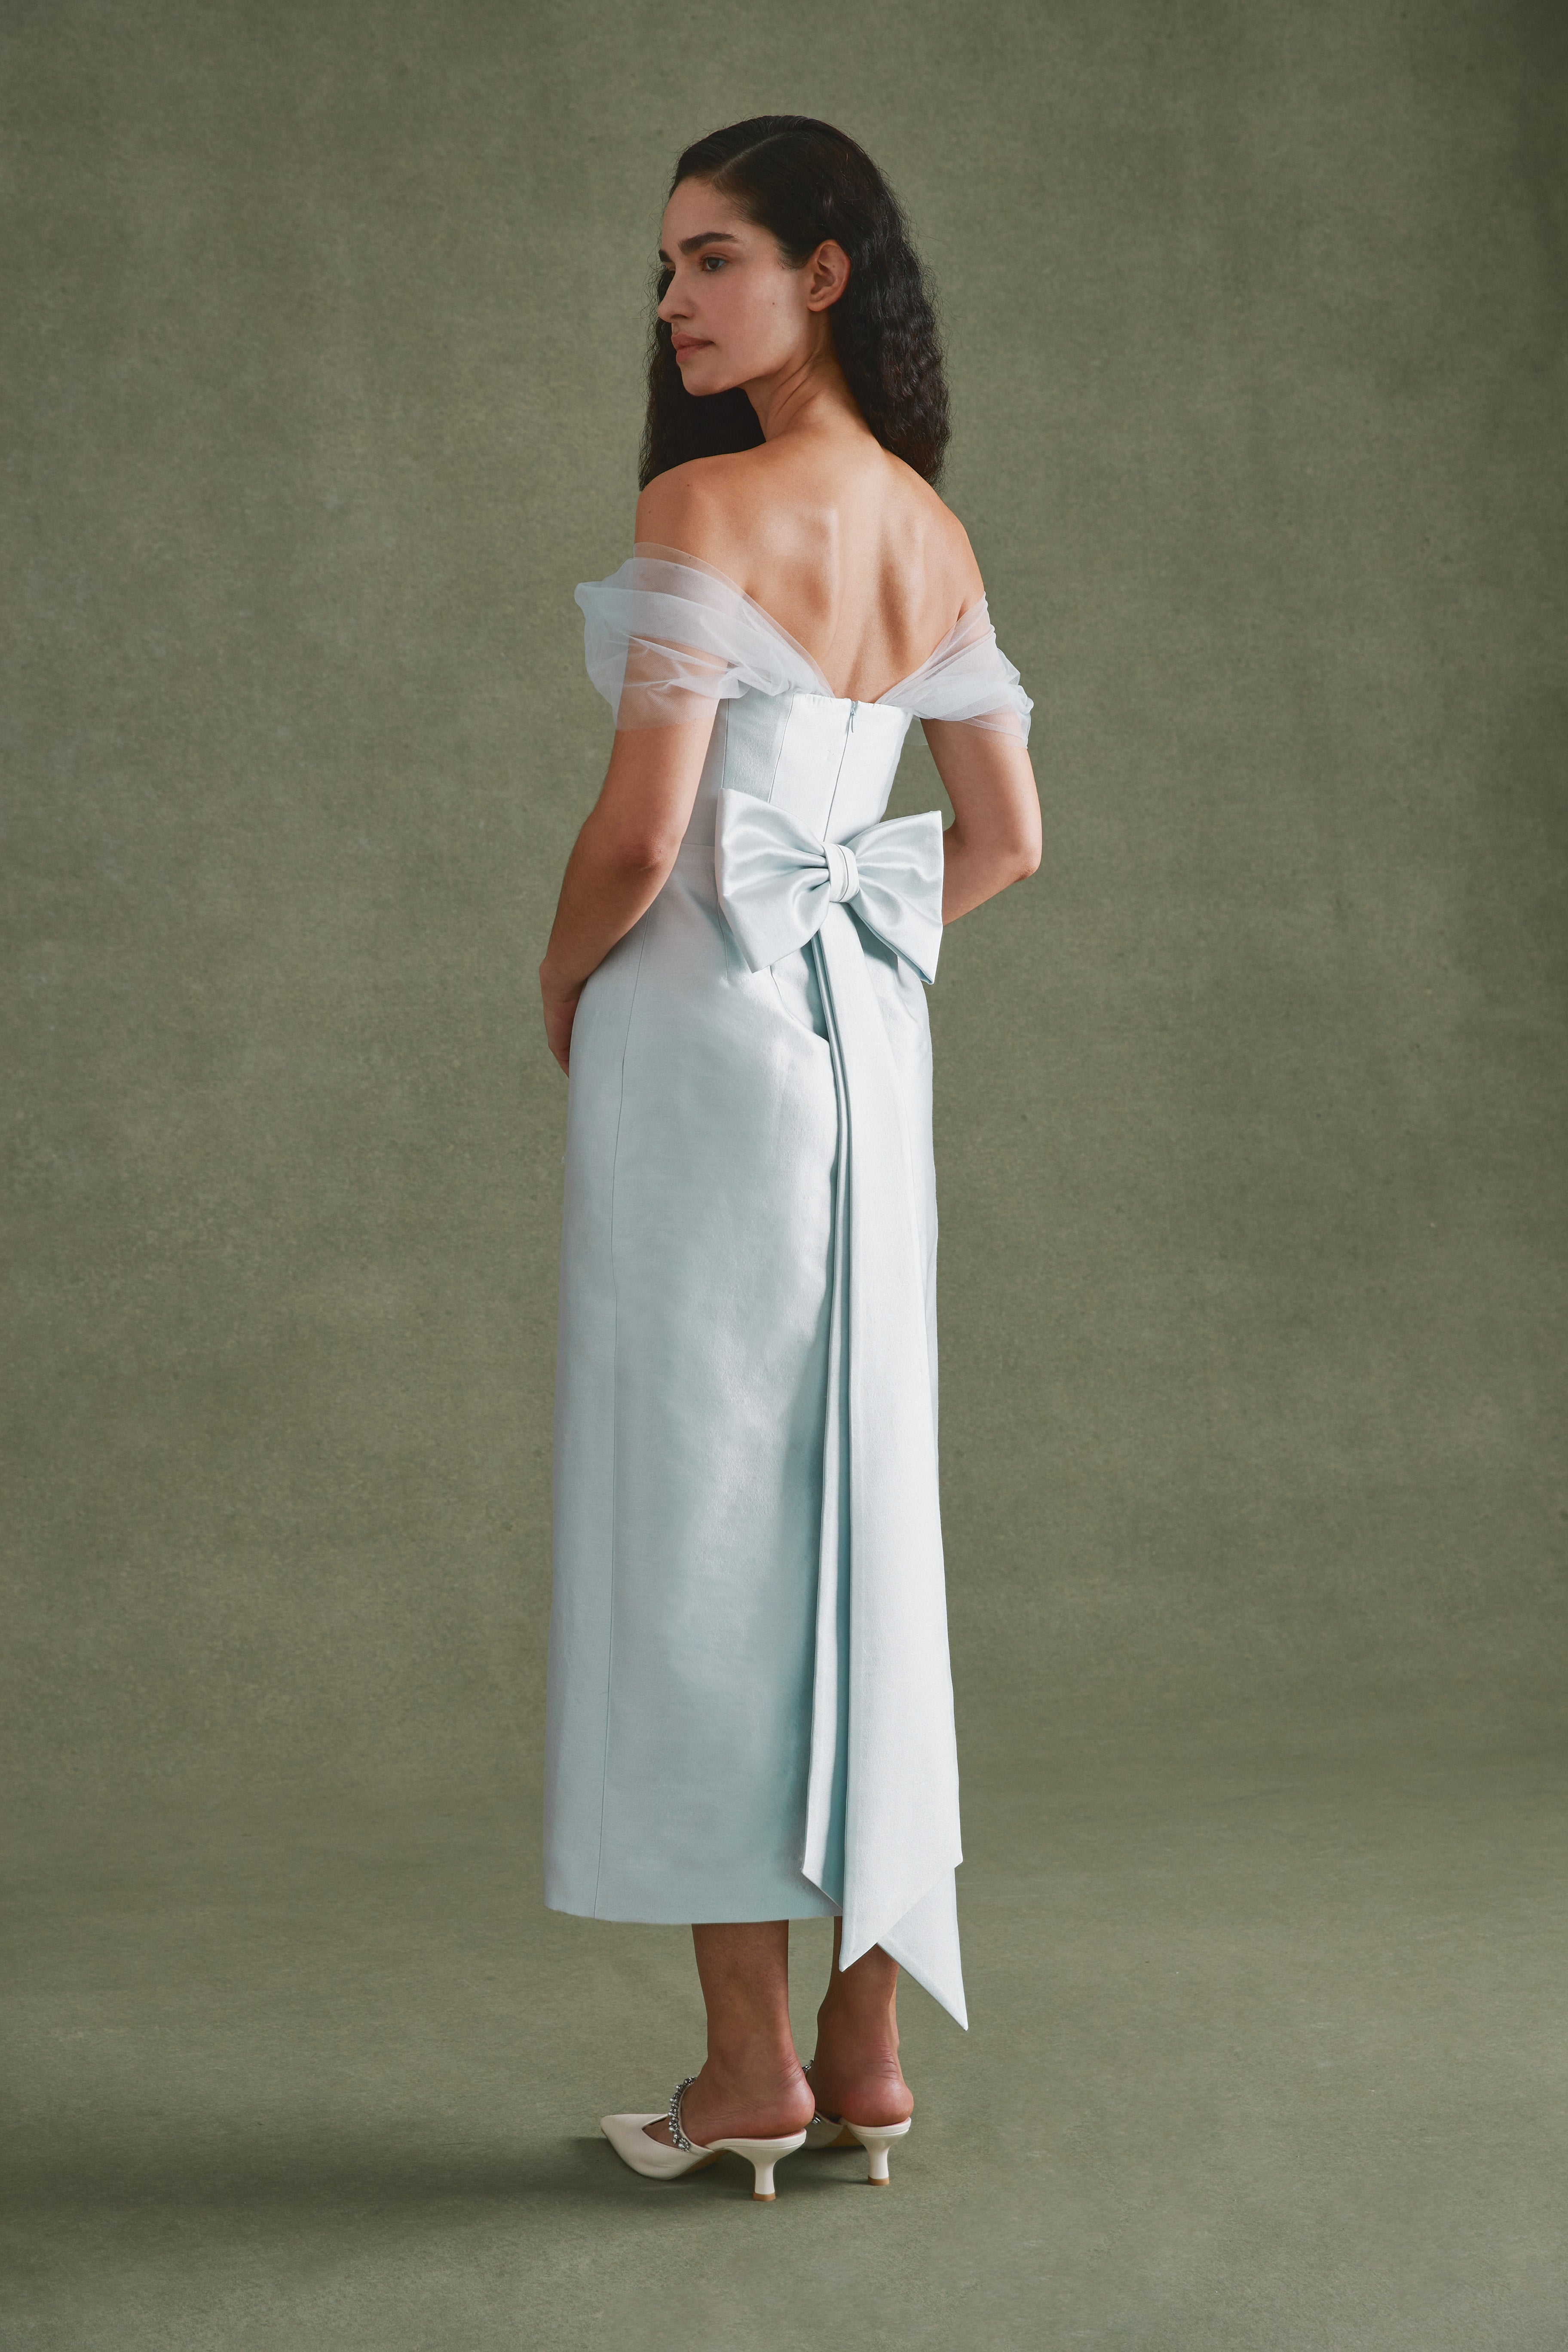 Alexandra Pijut Sylvie Dress in light blue silk wool with tulle sleeves. Midi dress, wedding guest, black tie, bridal, outfit.  Mother of the bride, groom.